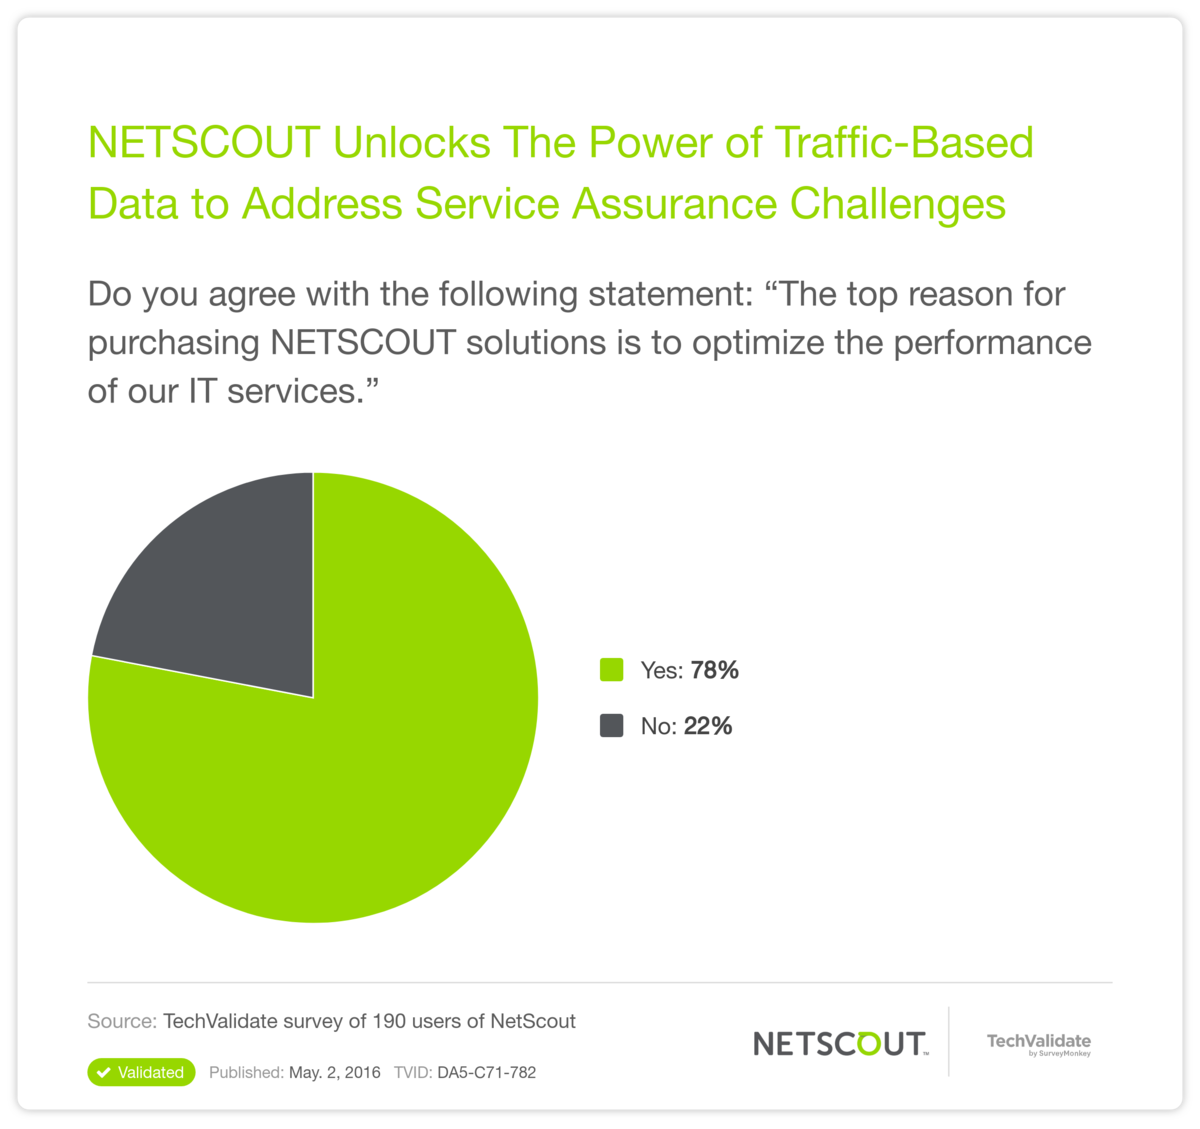 NETSCOUT Unlocks The Power of Traffic-Based Data to Address Service Assurance Challenges